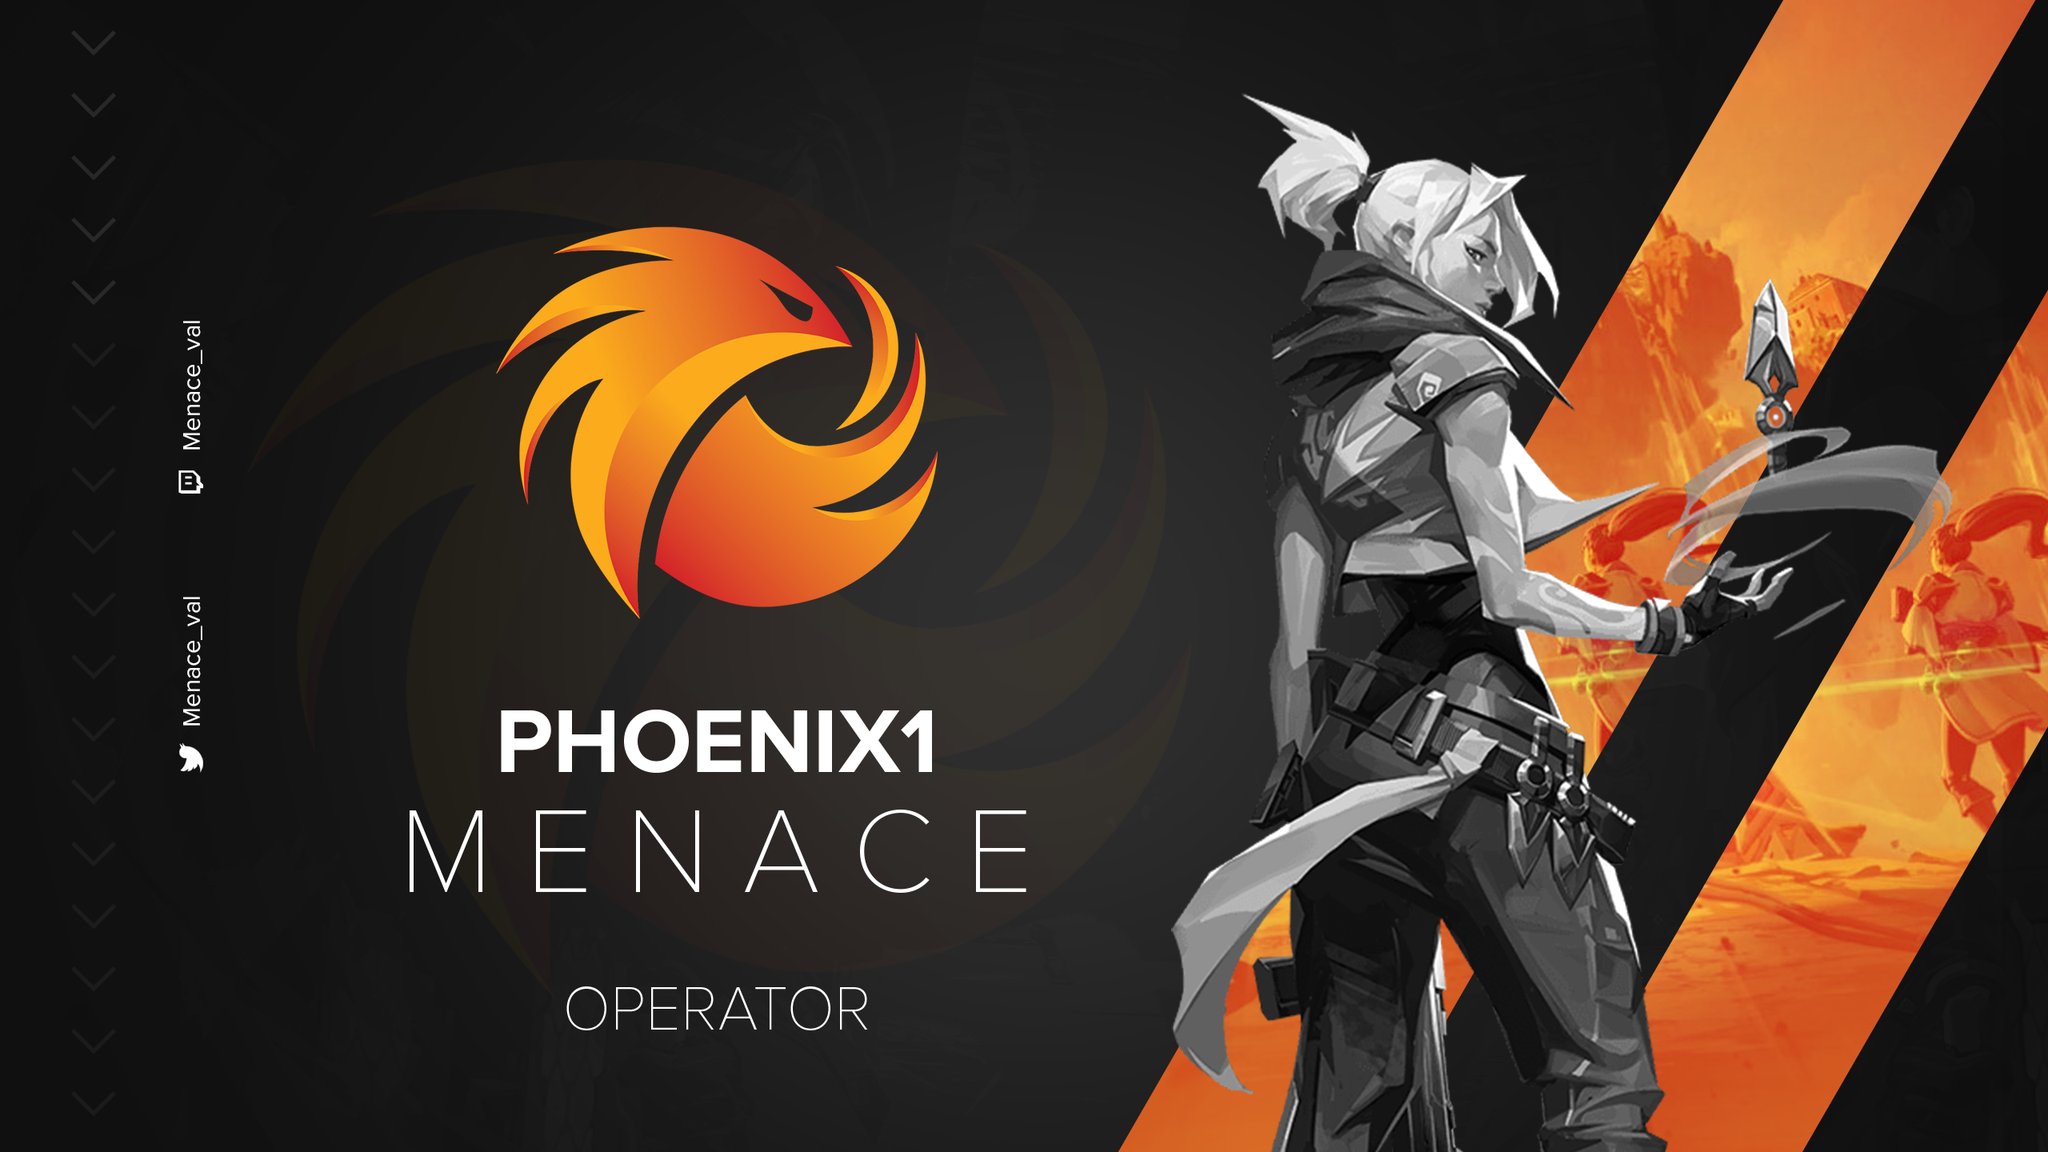 Phoenix1 Menace was among the players who alleged their former org hadn't given them their prize money